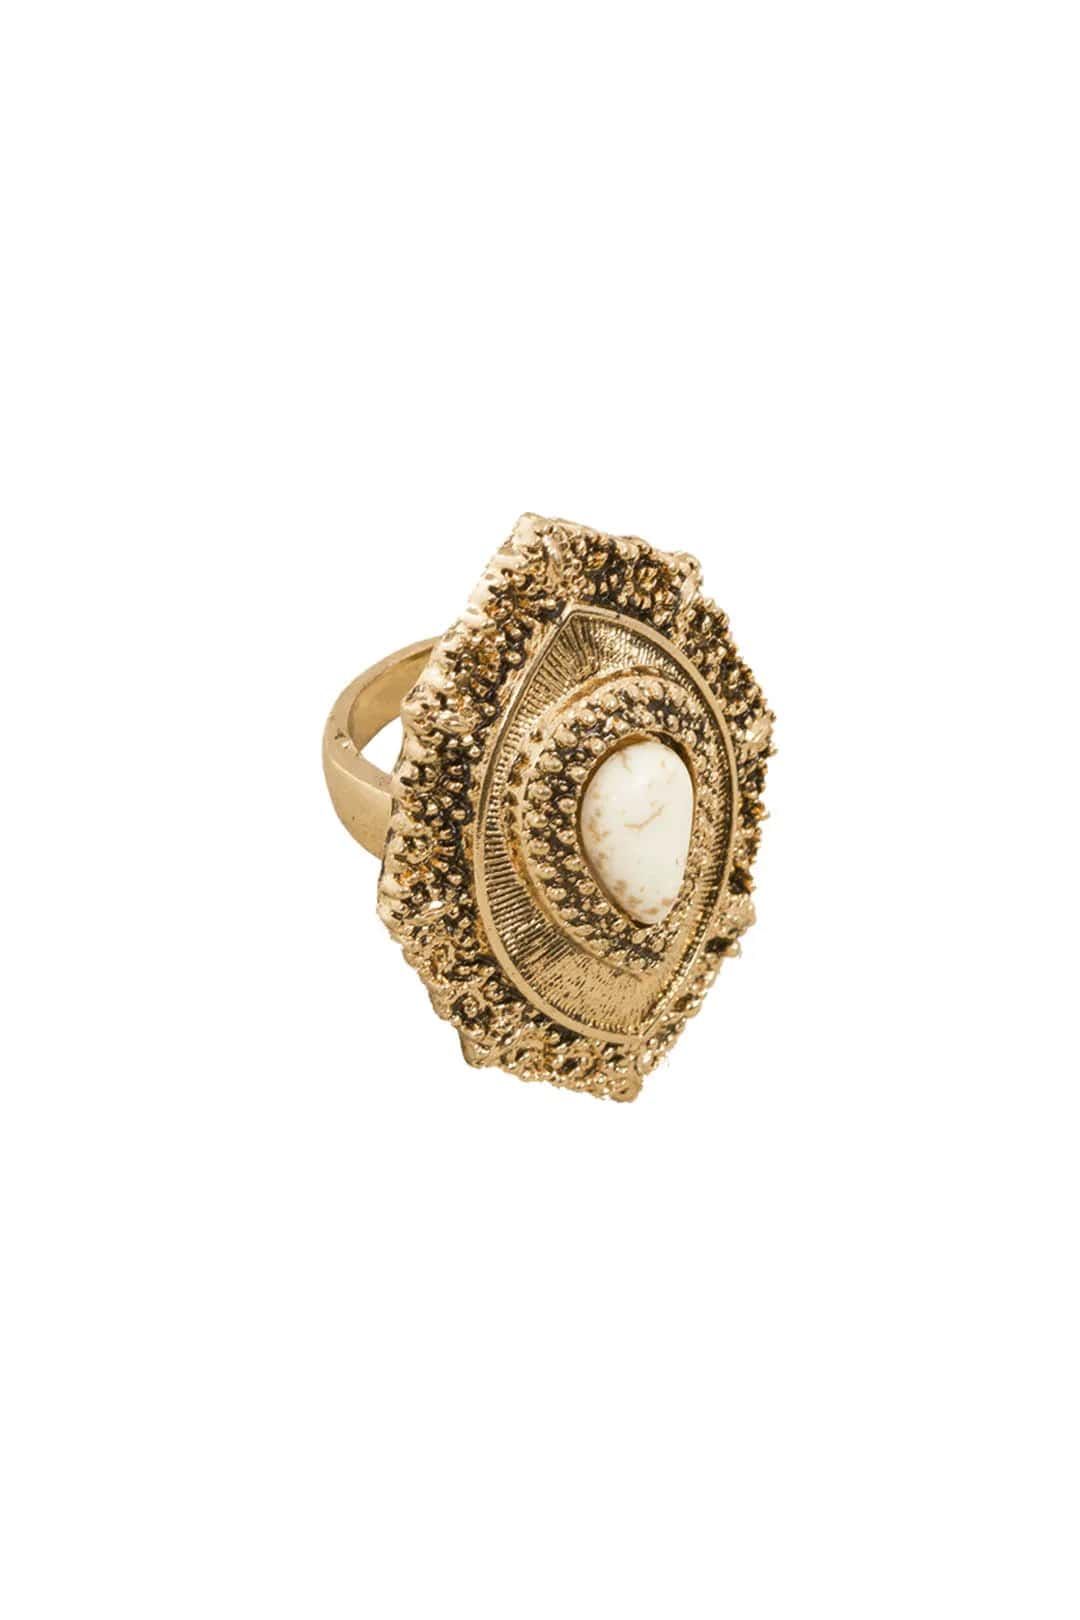 Boho Stone Teardrop Ring in Natural Gold by Adorne, available for rent